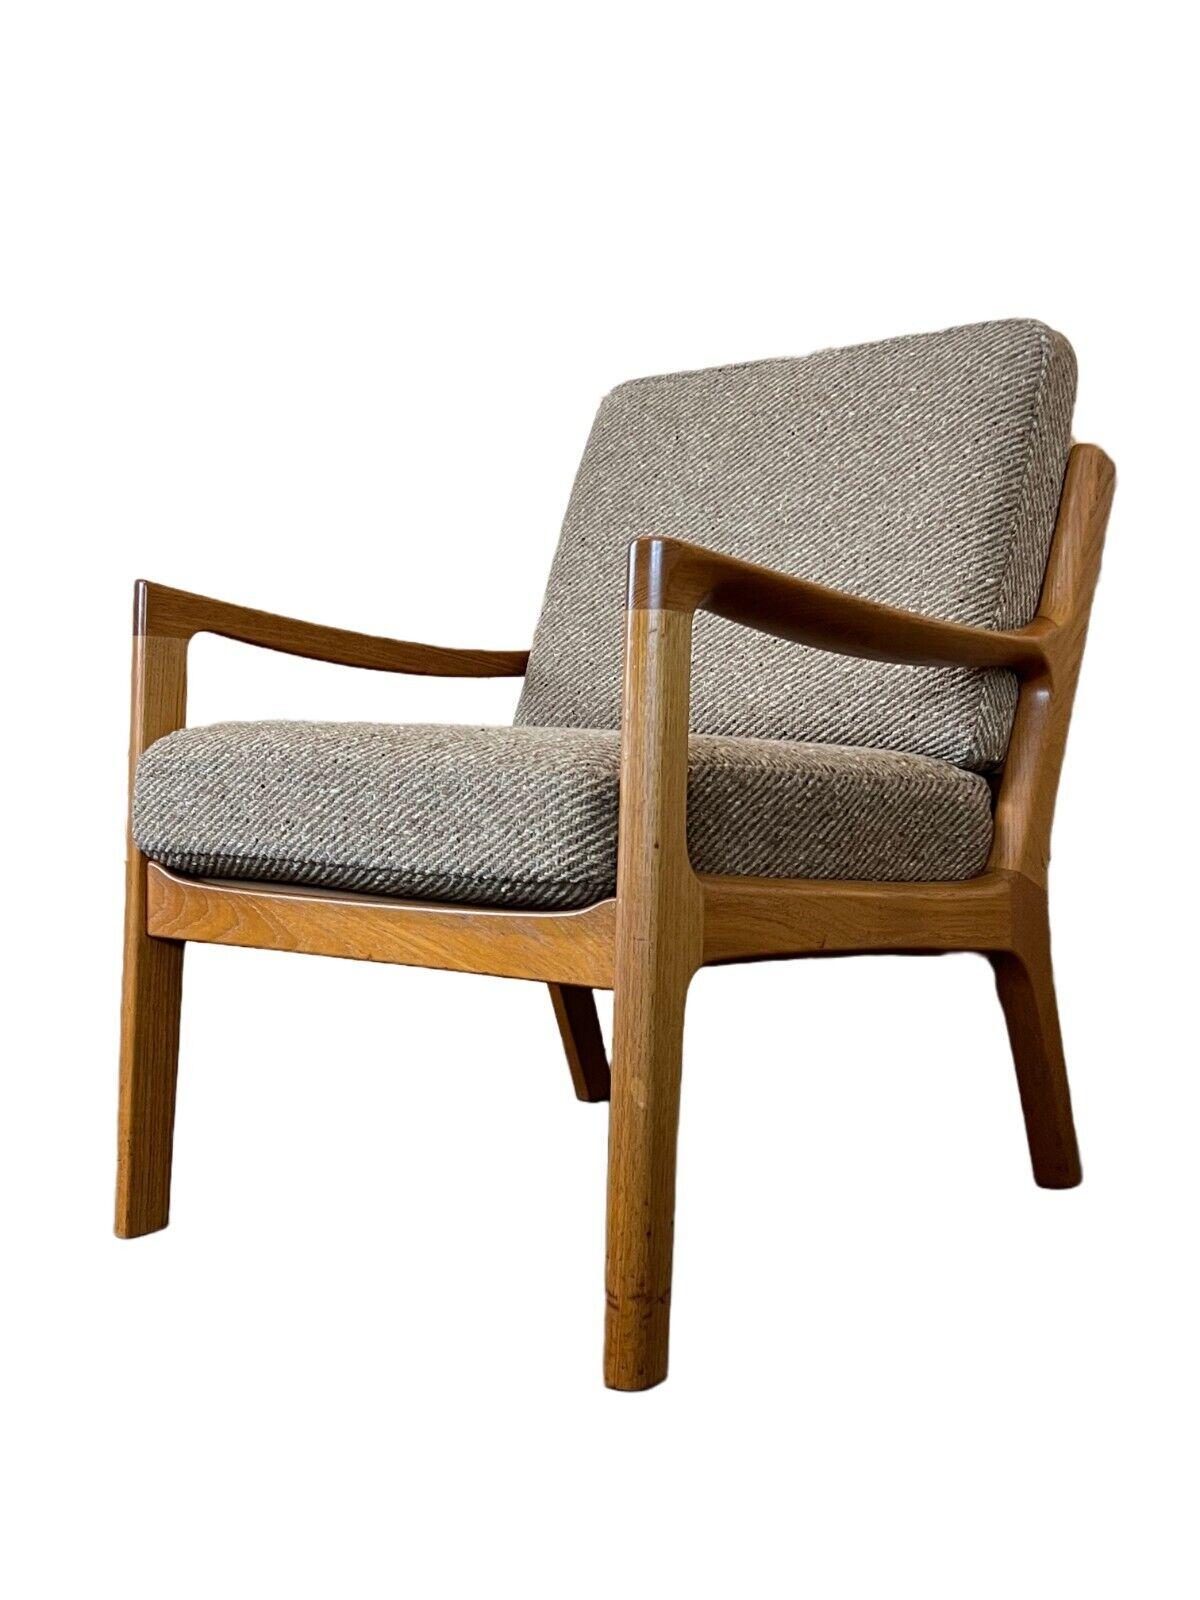 60s 70s Teak Easy Chair Armchair Ole Wanscher Poul Jeppesens Møbelfabrik

Object: Easy Chair

Manufacturer: Poul Jeppesens Furniture Factory

Condition: good - vintage

Age: around 1960-1970

Dimensions:

Width = 68.5cm
Depth =